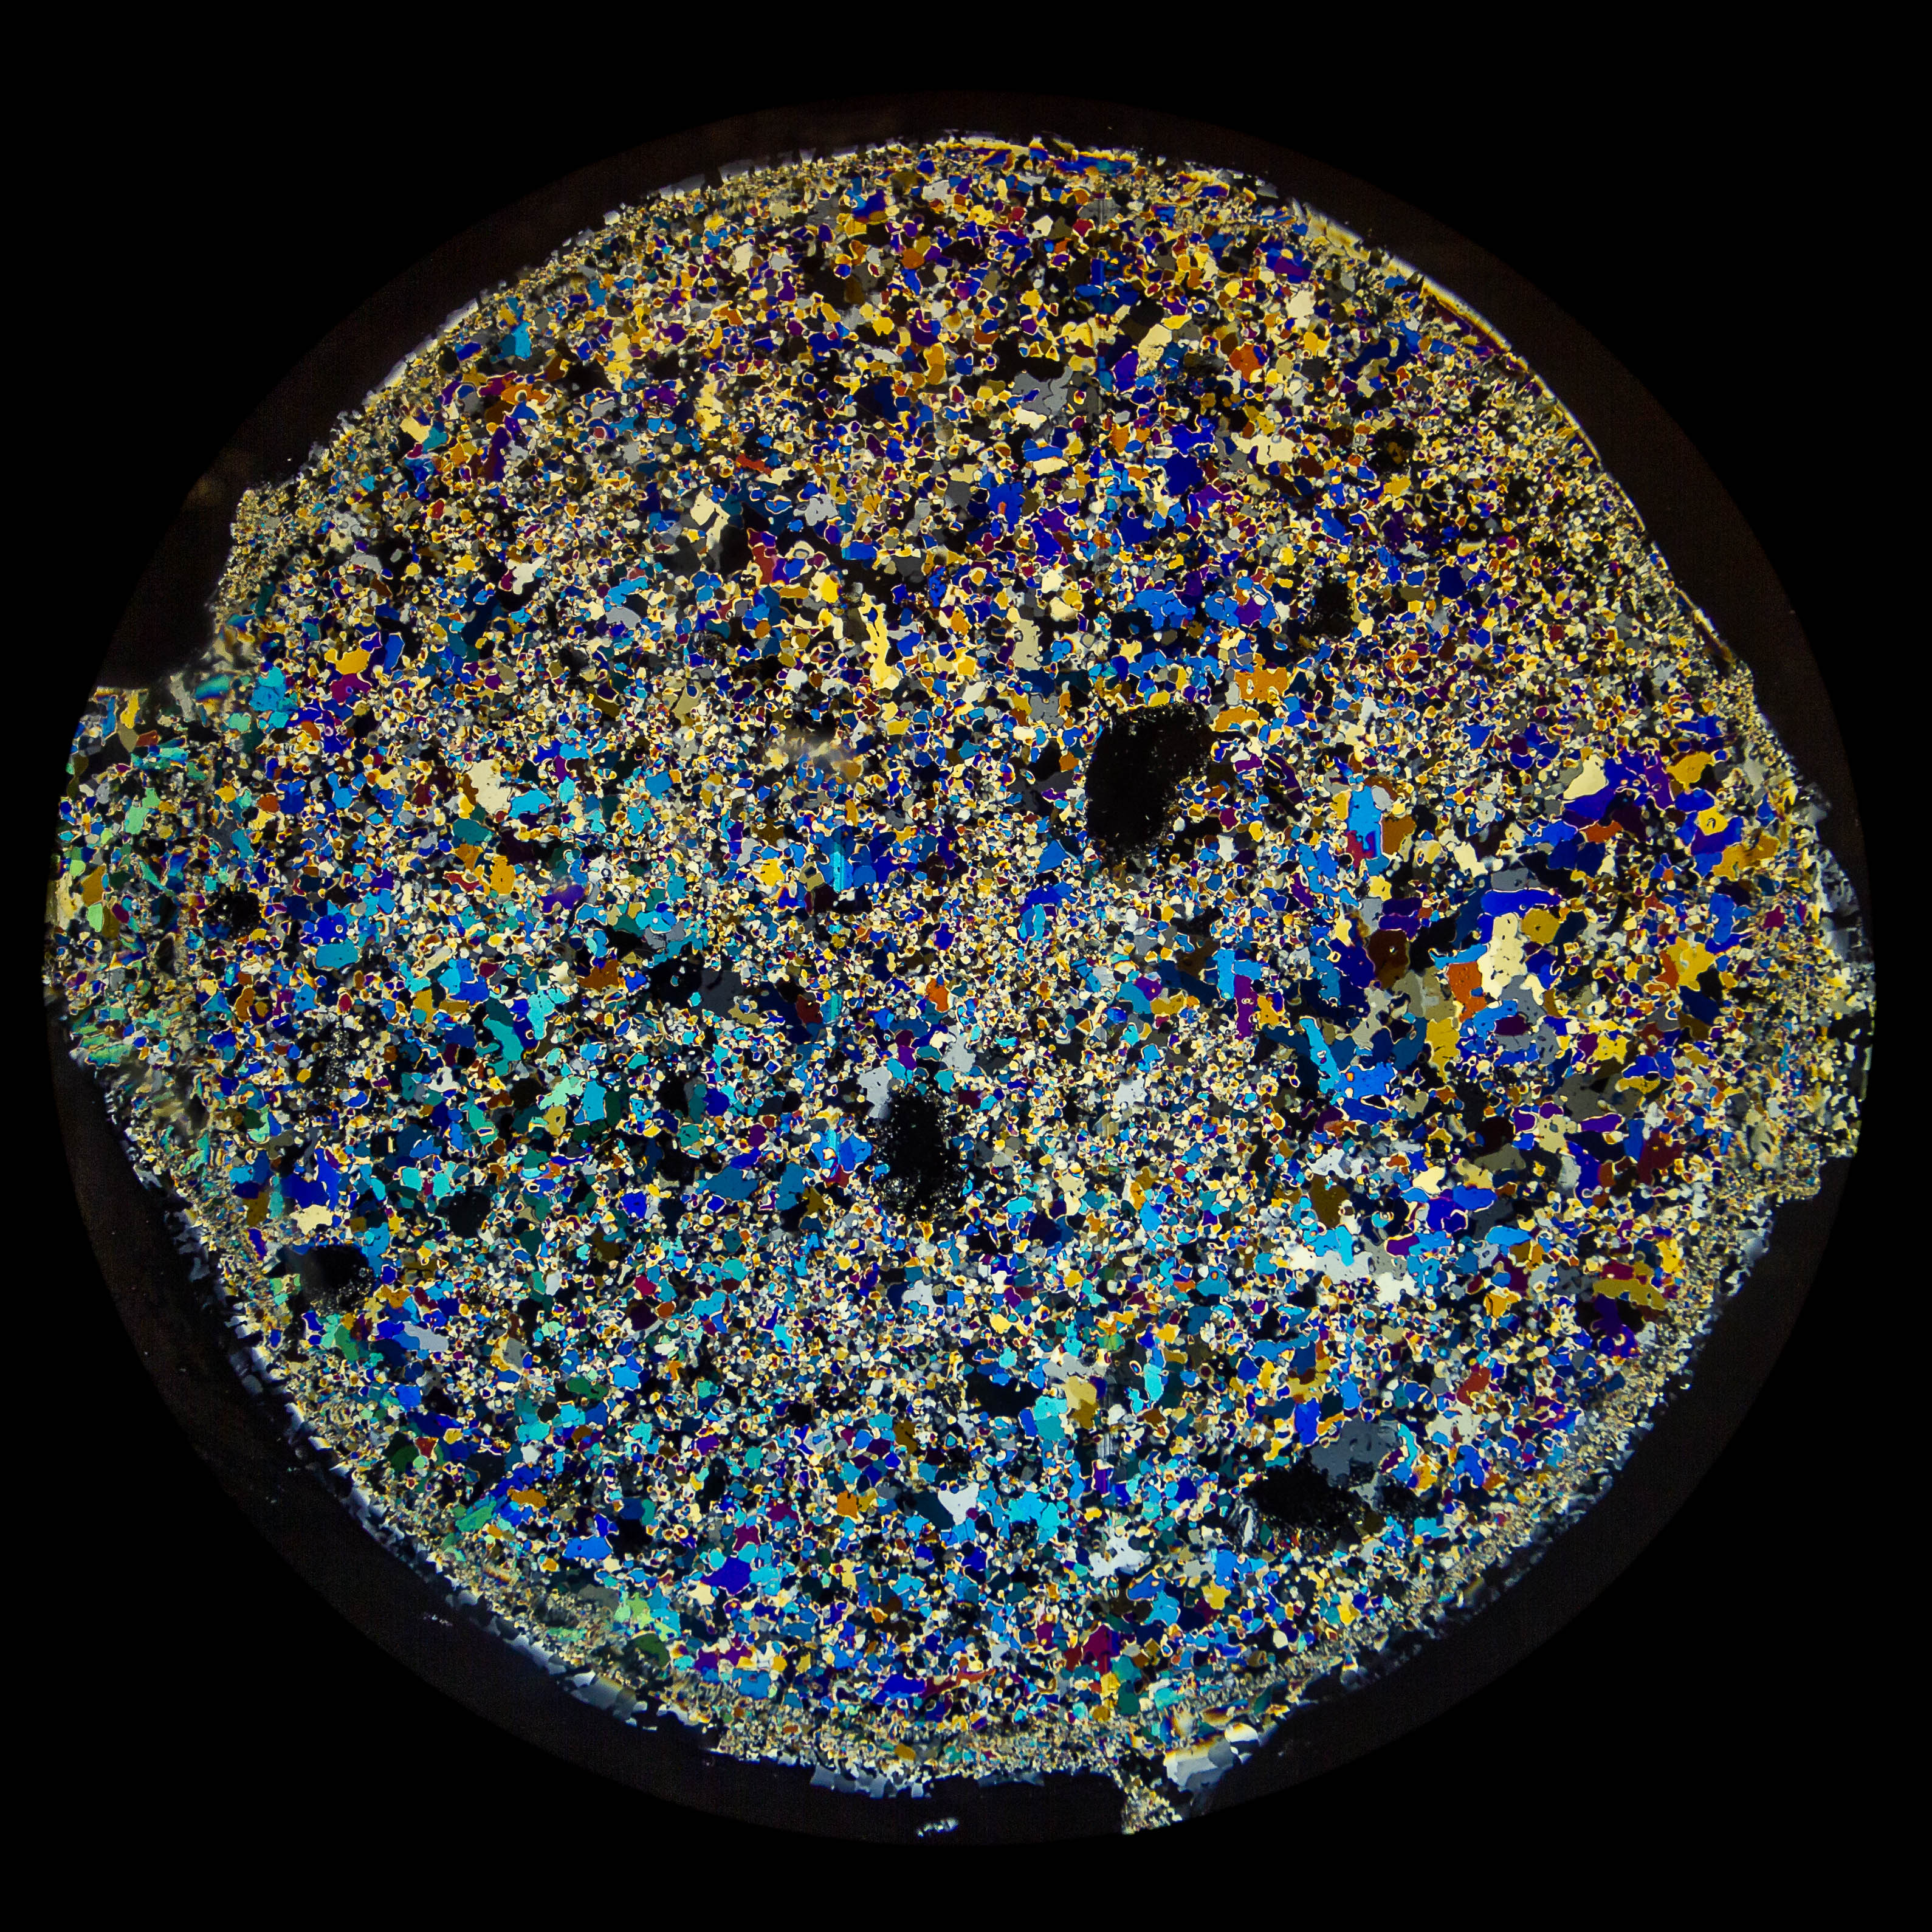 Polarized light reveals a colorful kaleidoscope of crystals in a thin section of sea ice.